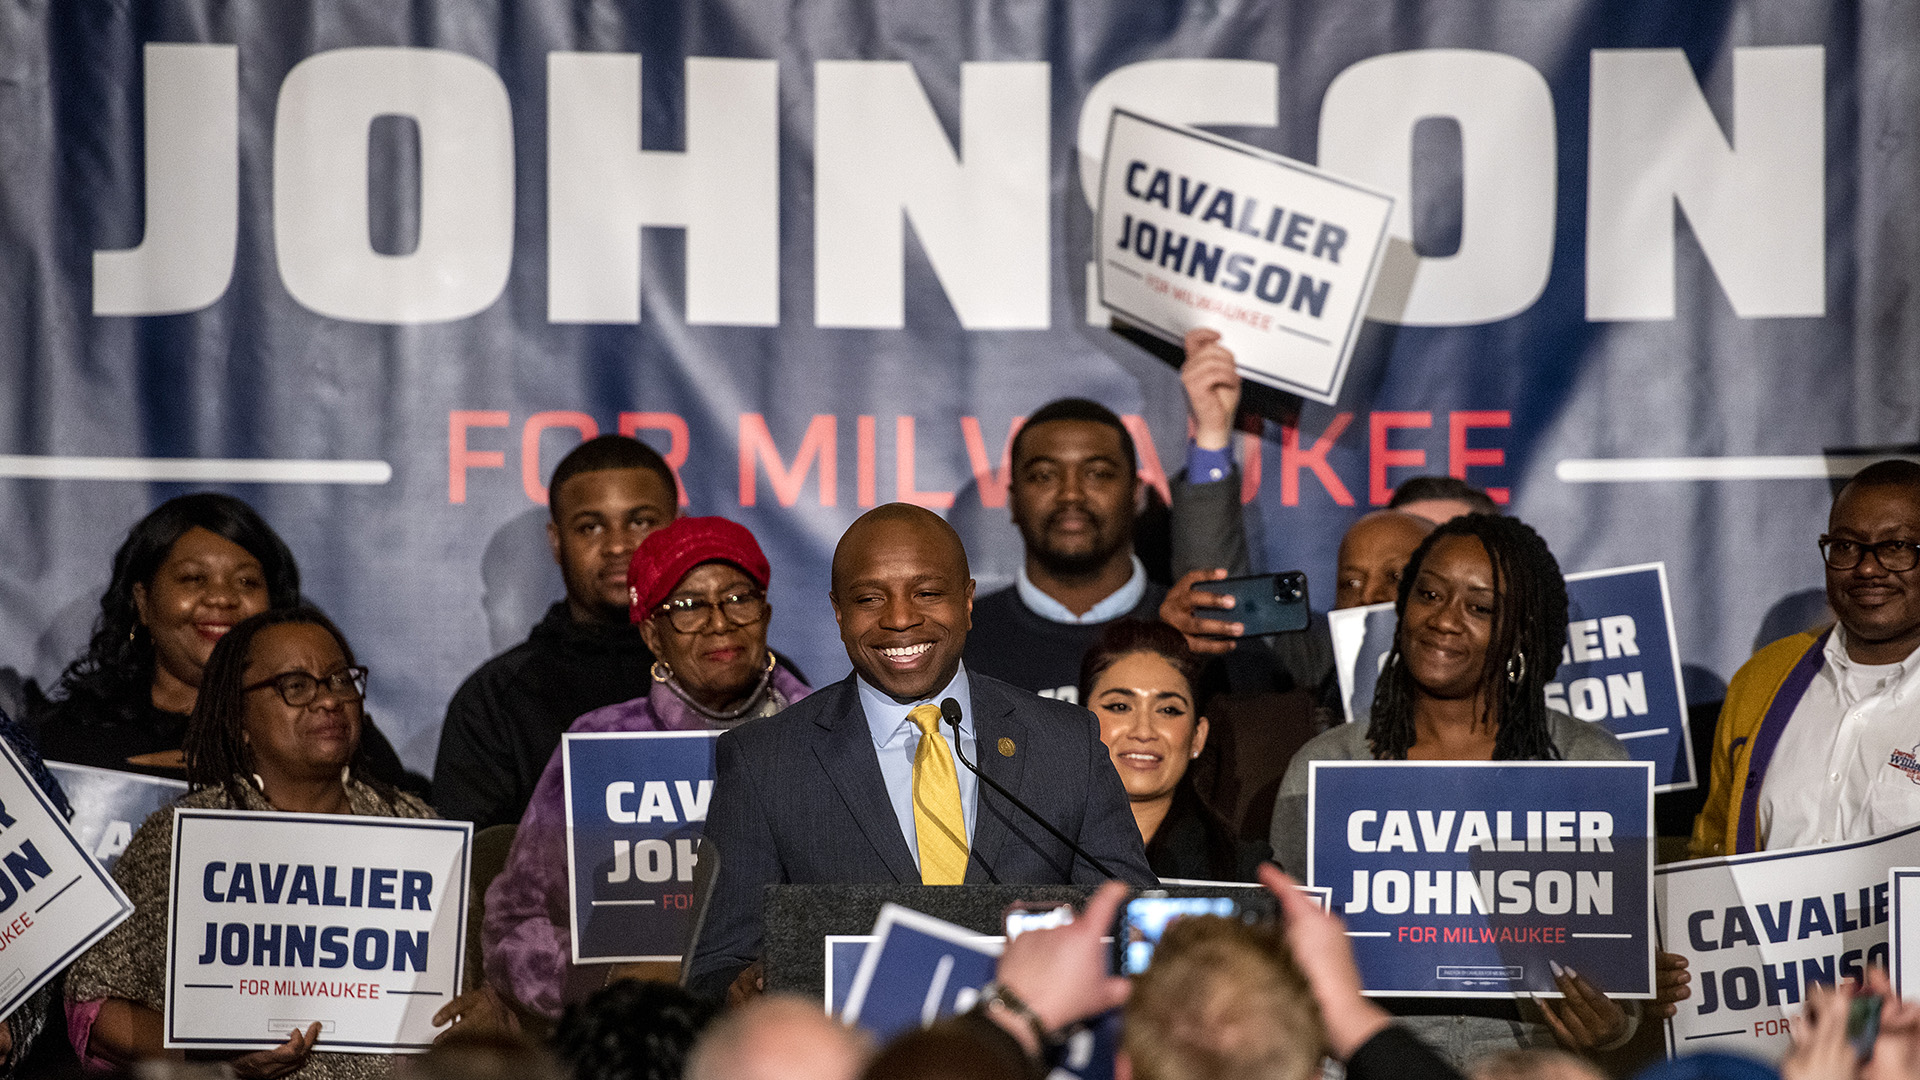 Cavalier Johnson stands at a podium in front of a group of supporters holding "Cavalier Johnson for Milwaukee" campaign signs.